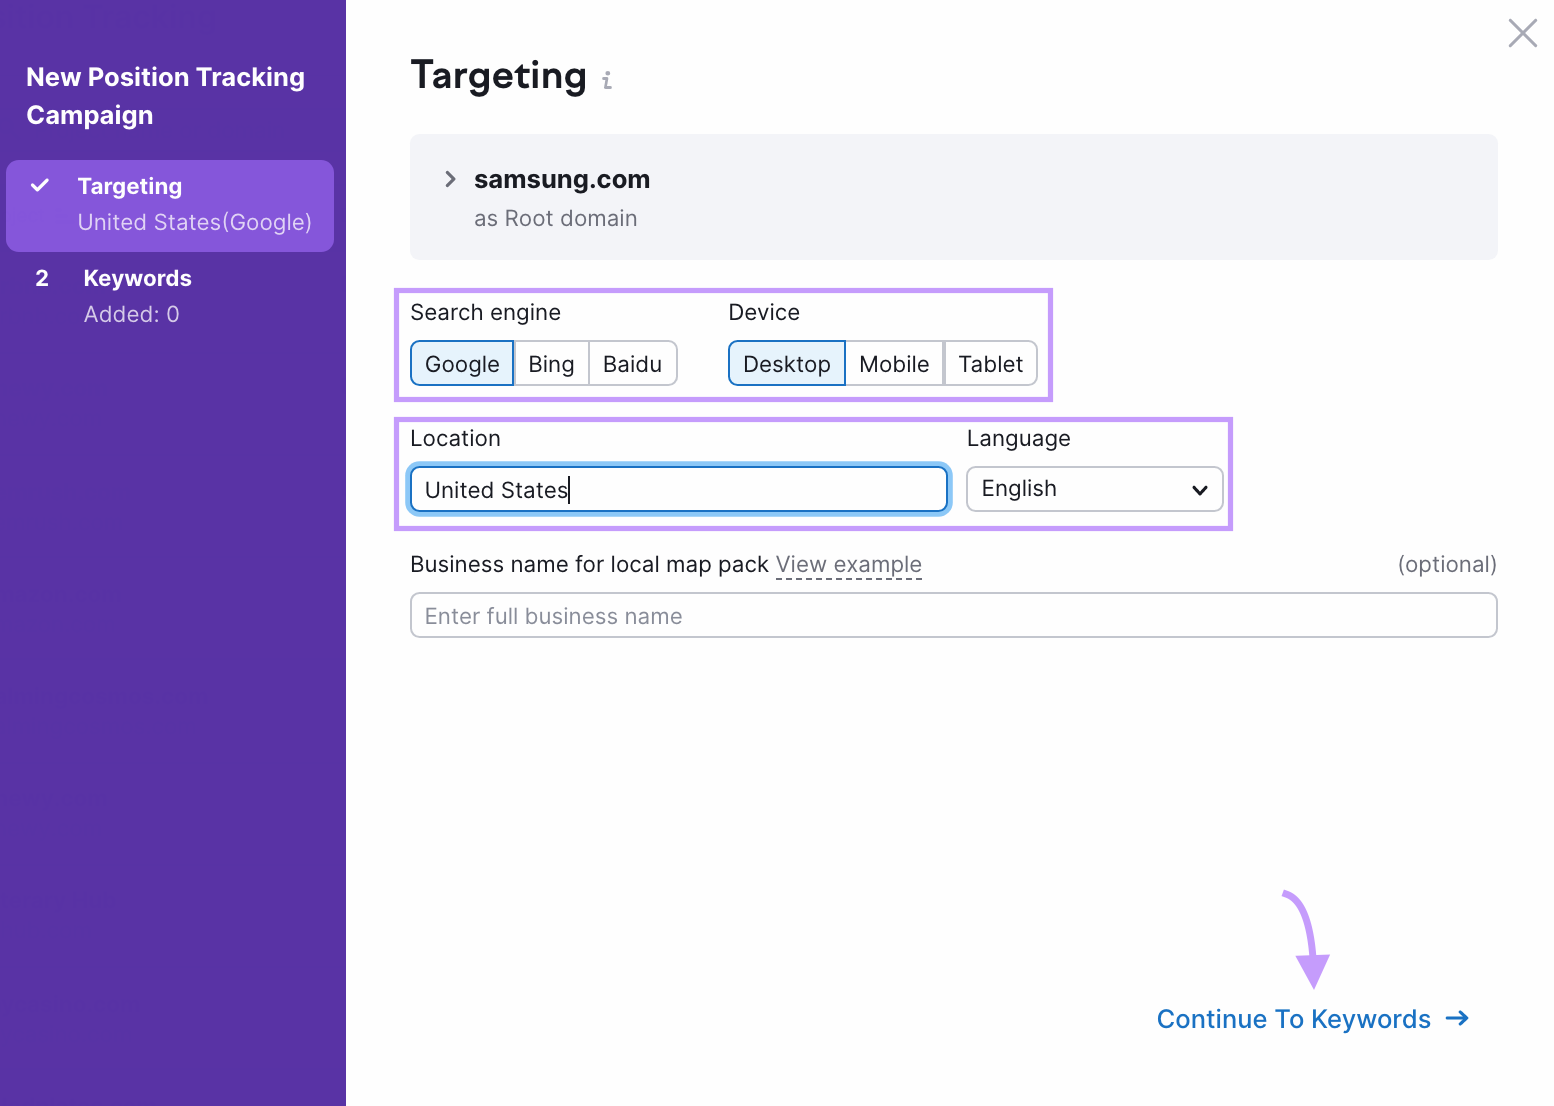 Position tracking campaign setup screen showing targeting options such as search engine, device, location and language.